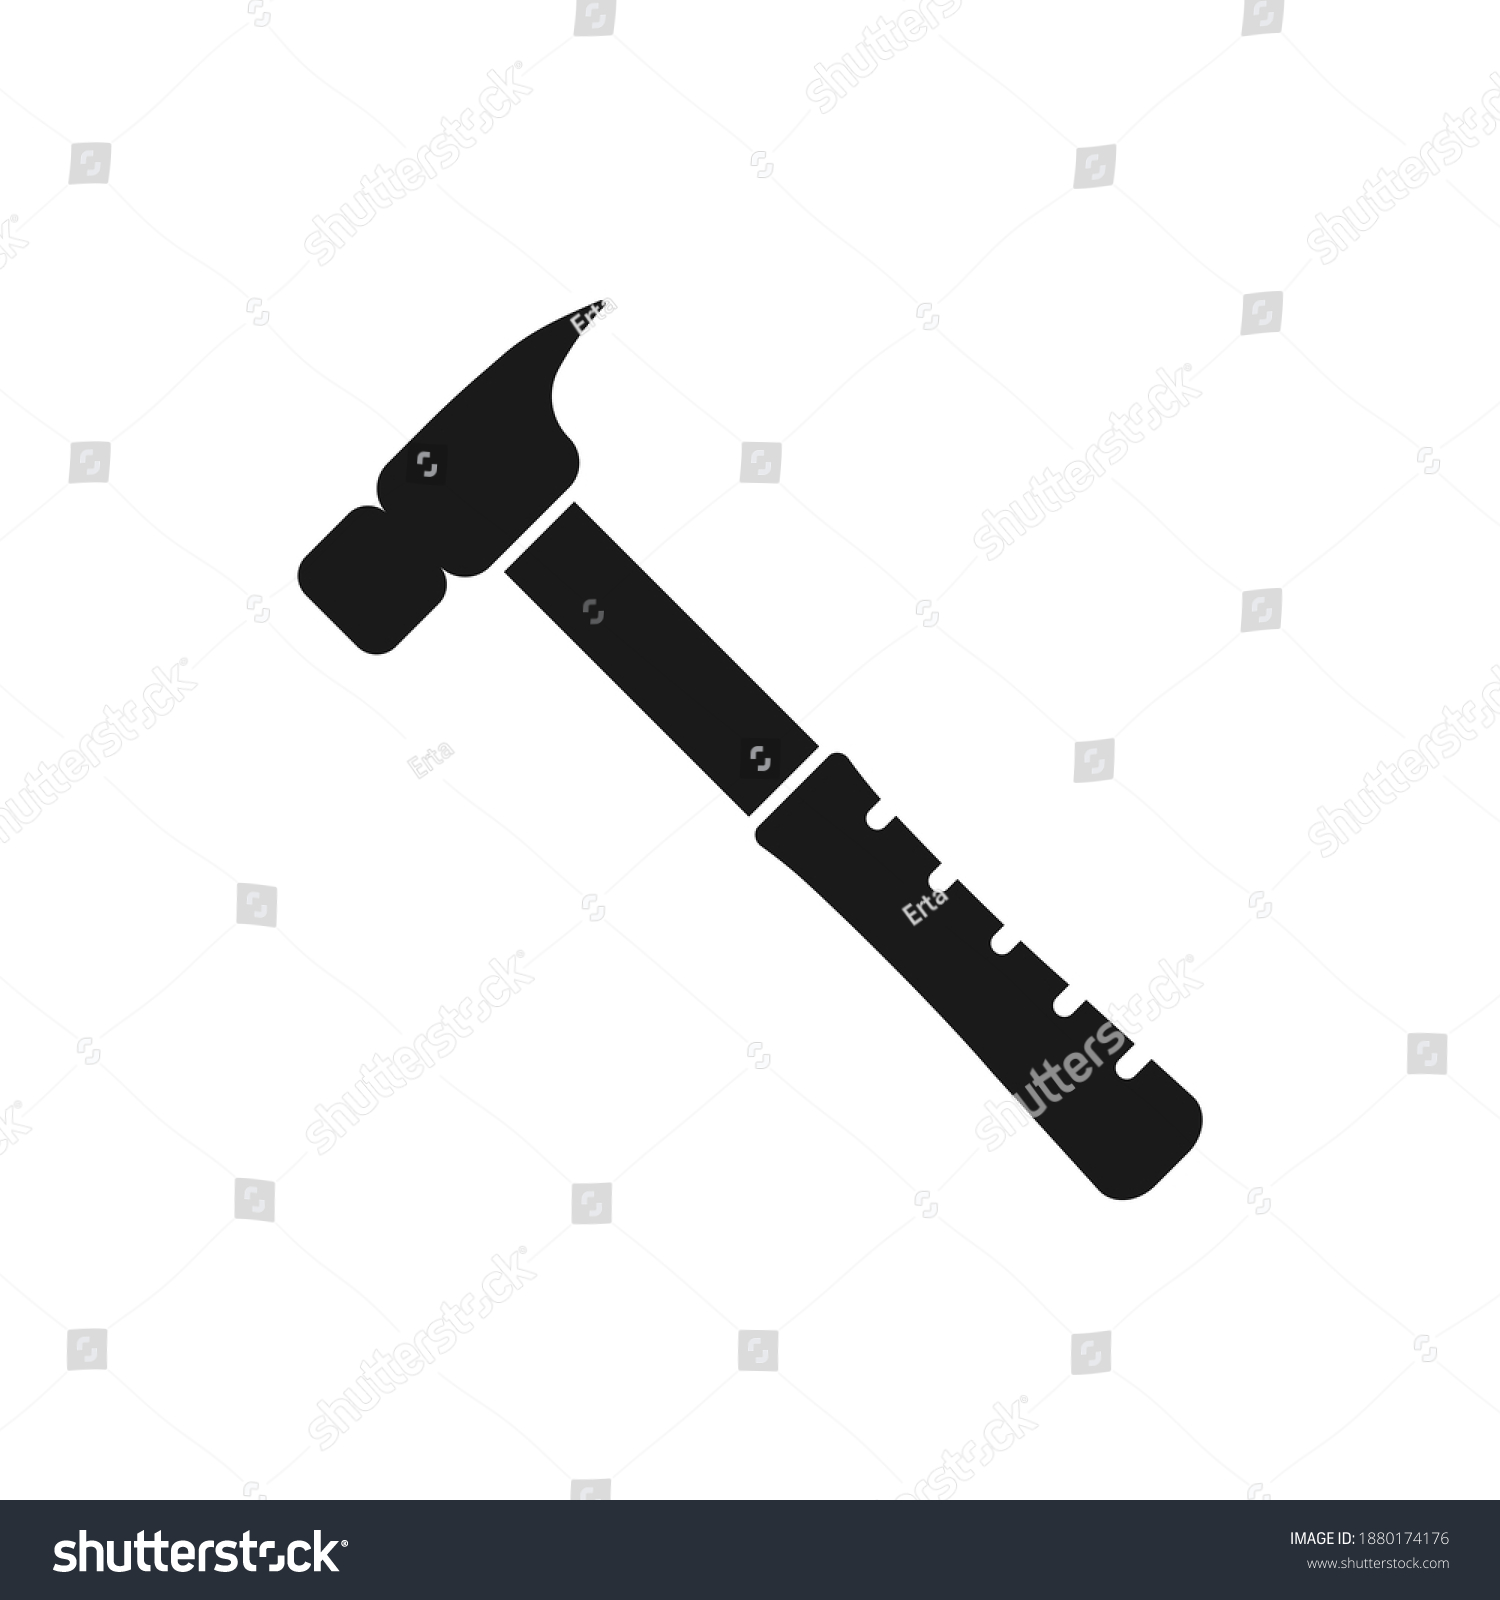 SVG of Hammer icon flat style isolated on white background. Vector illustration svg